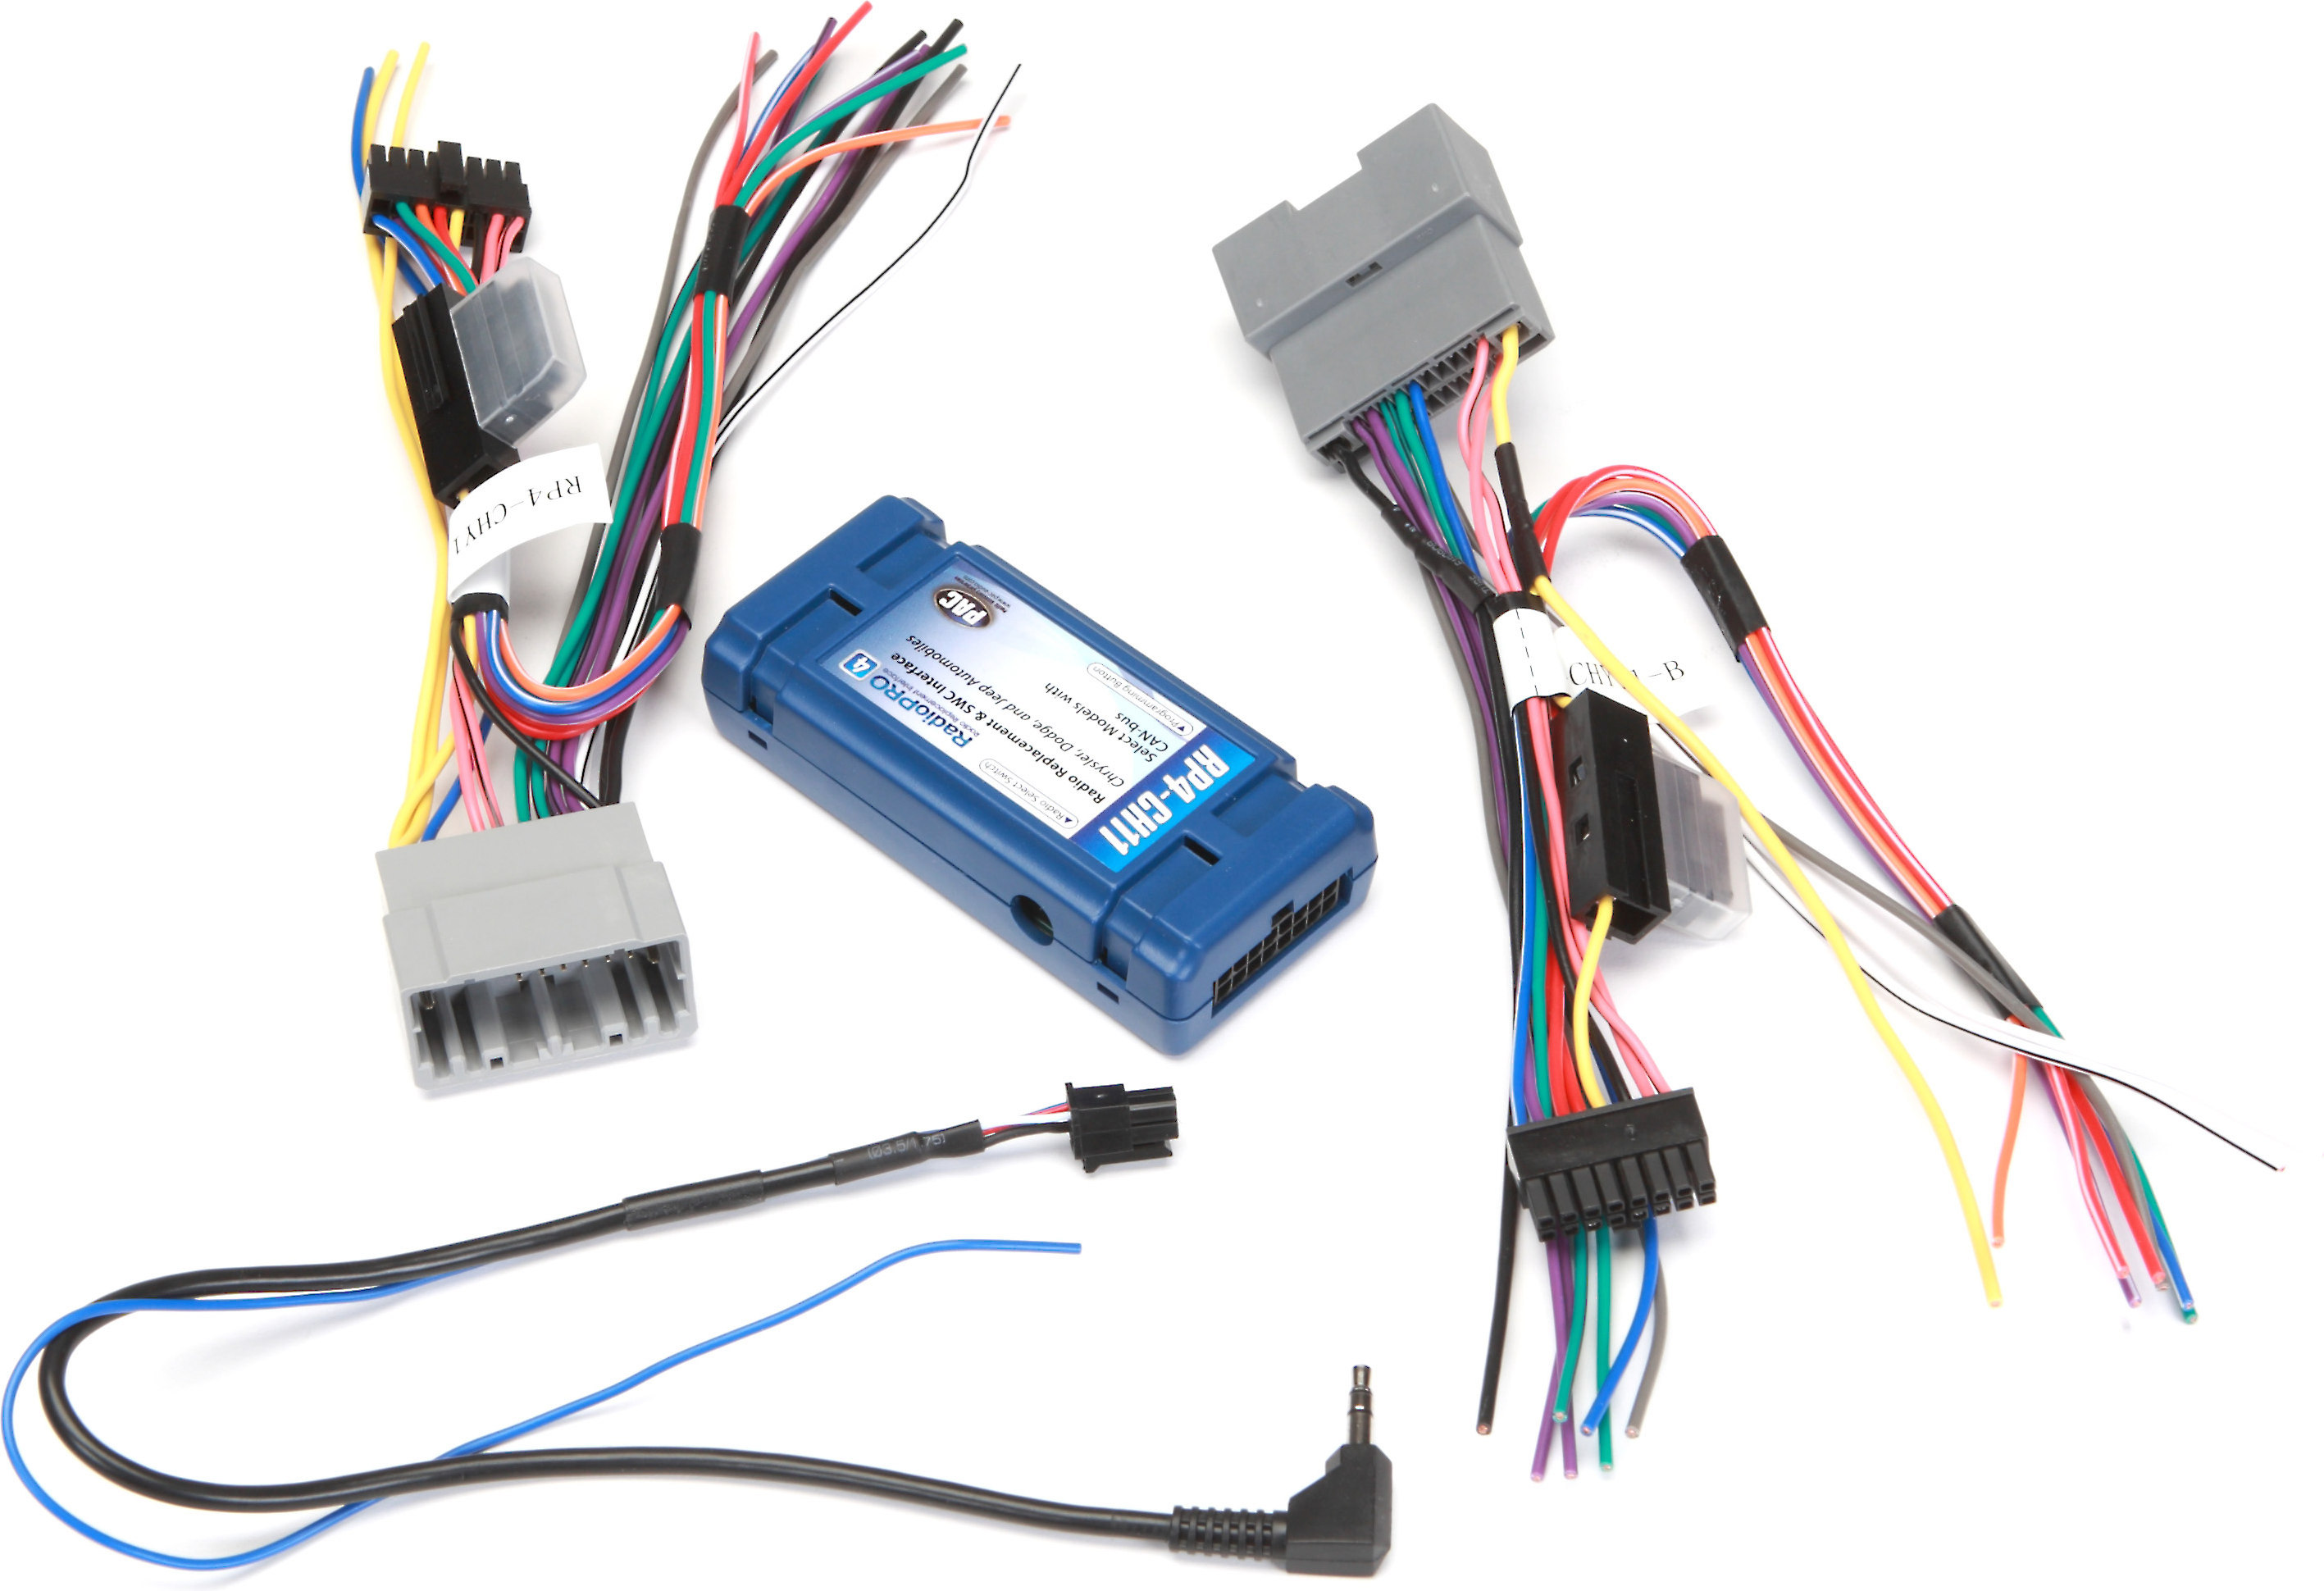 Pac Aftermarket Radio Wiring Harness Wiring Diagrams Source